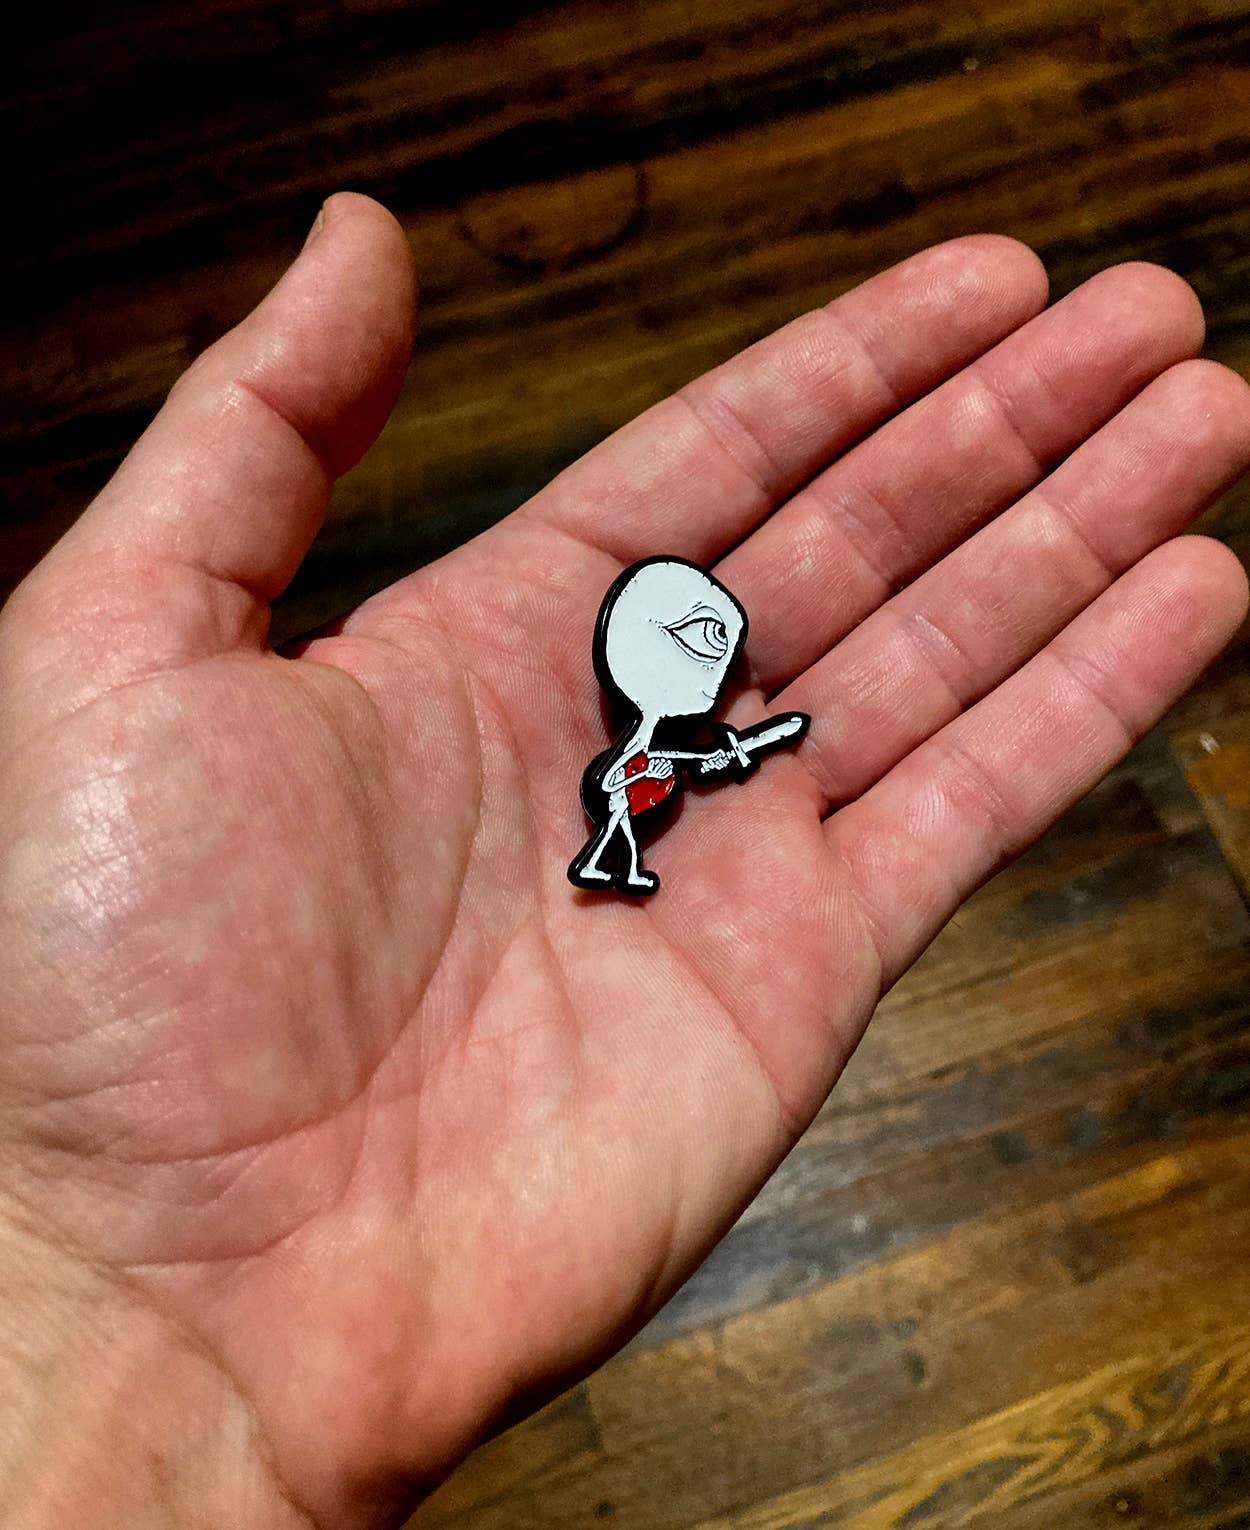 Courage pin